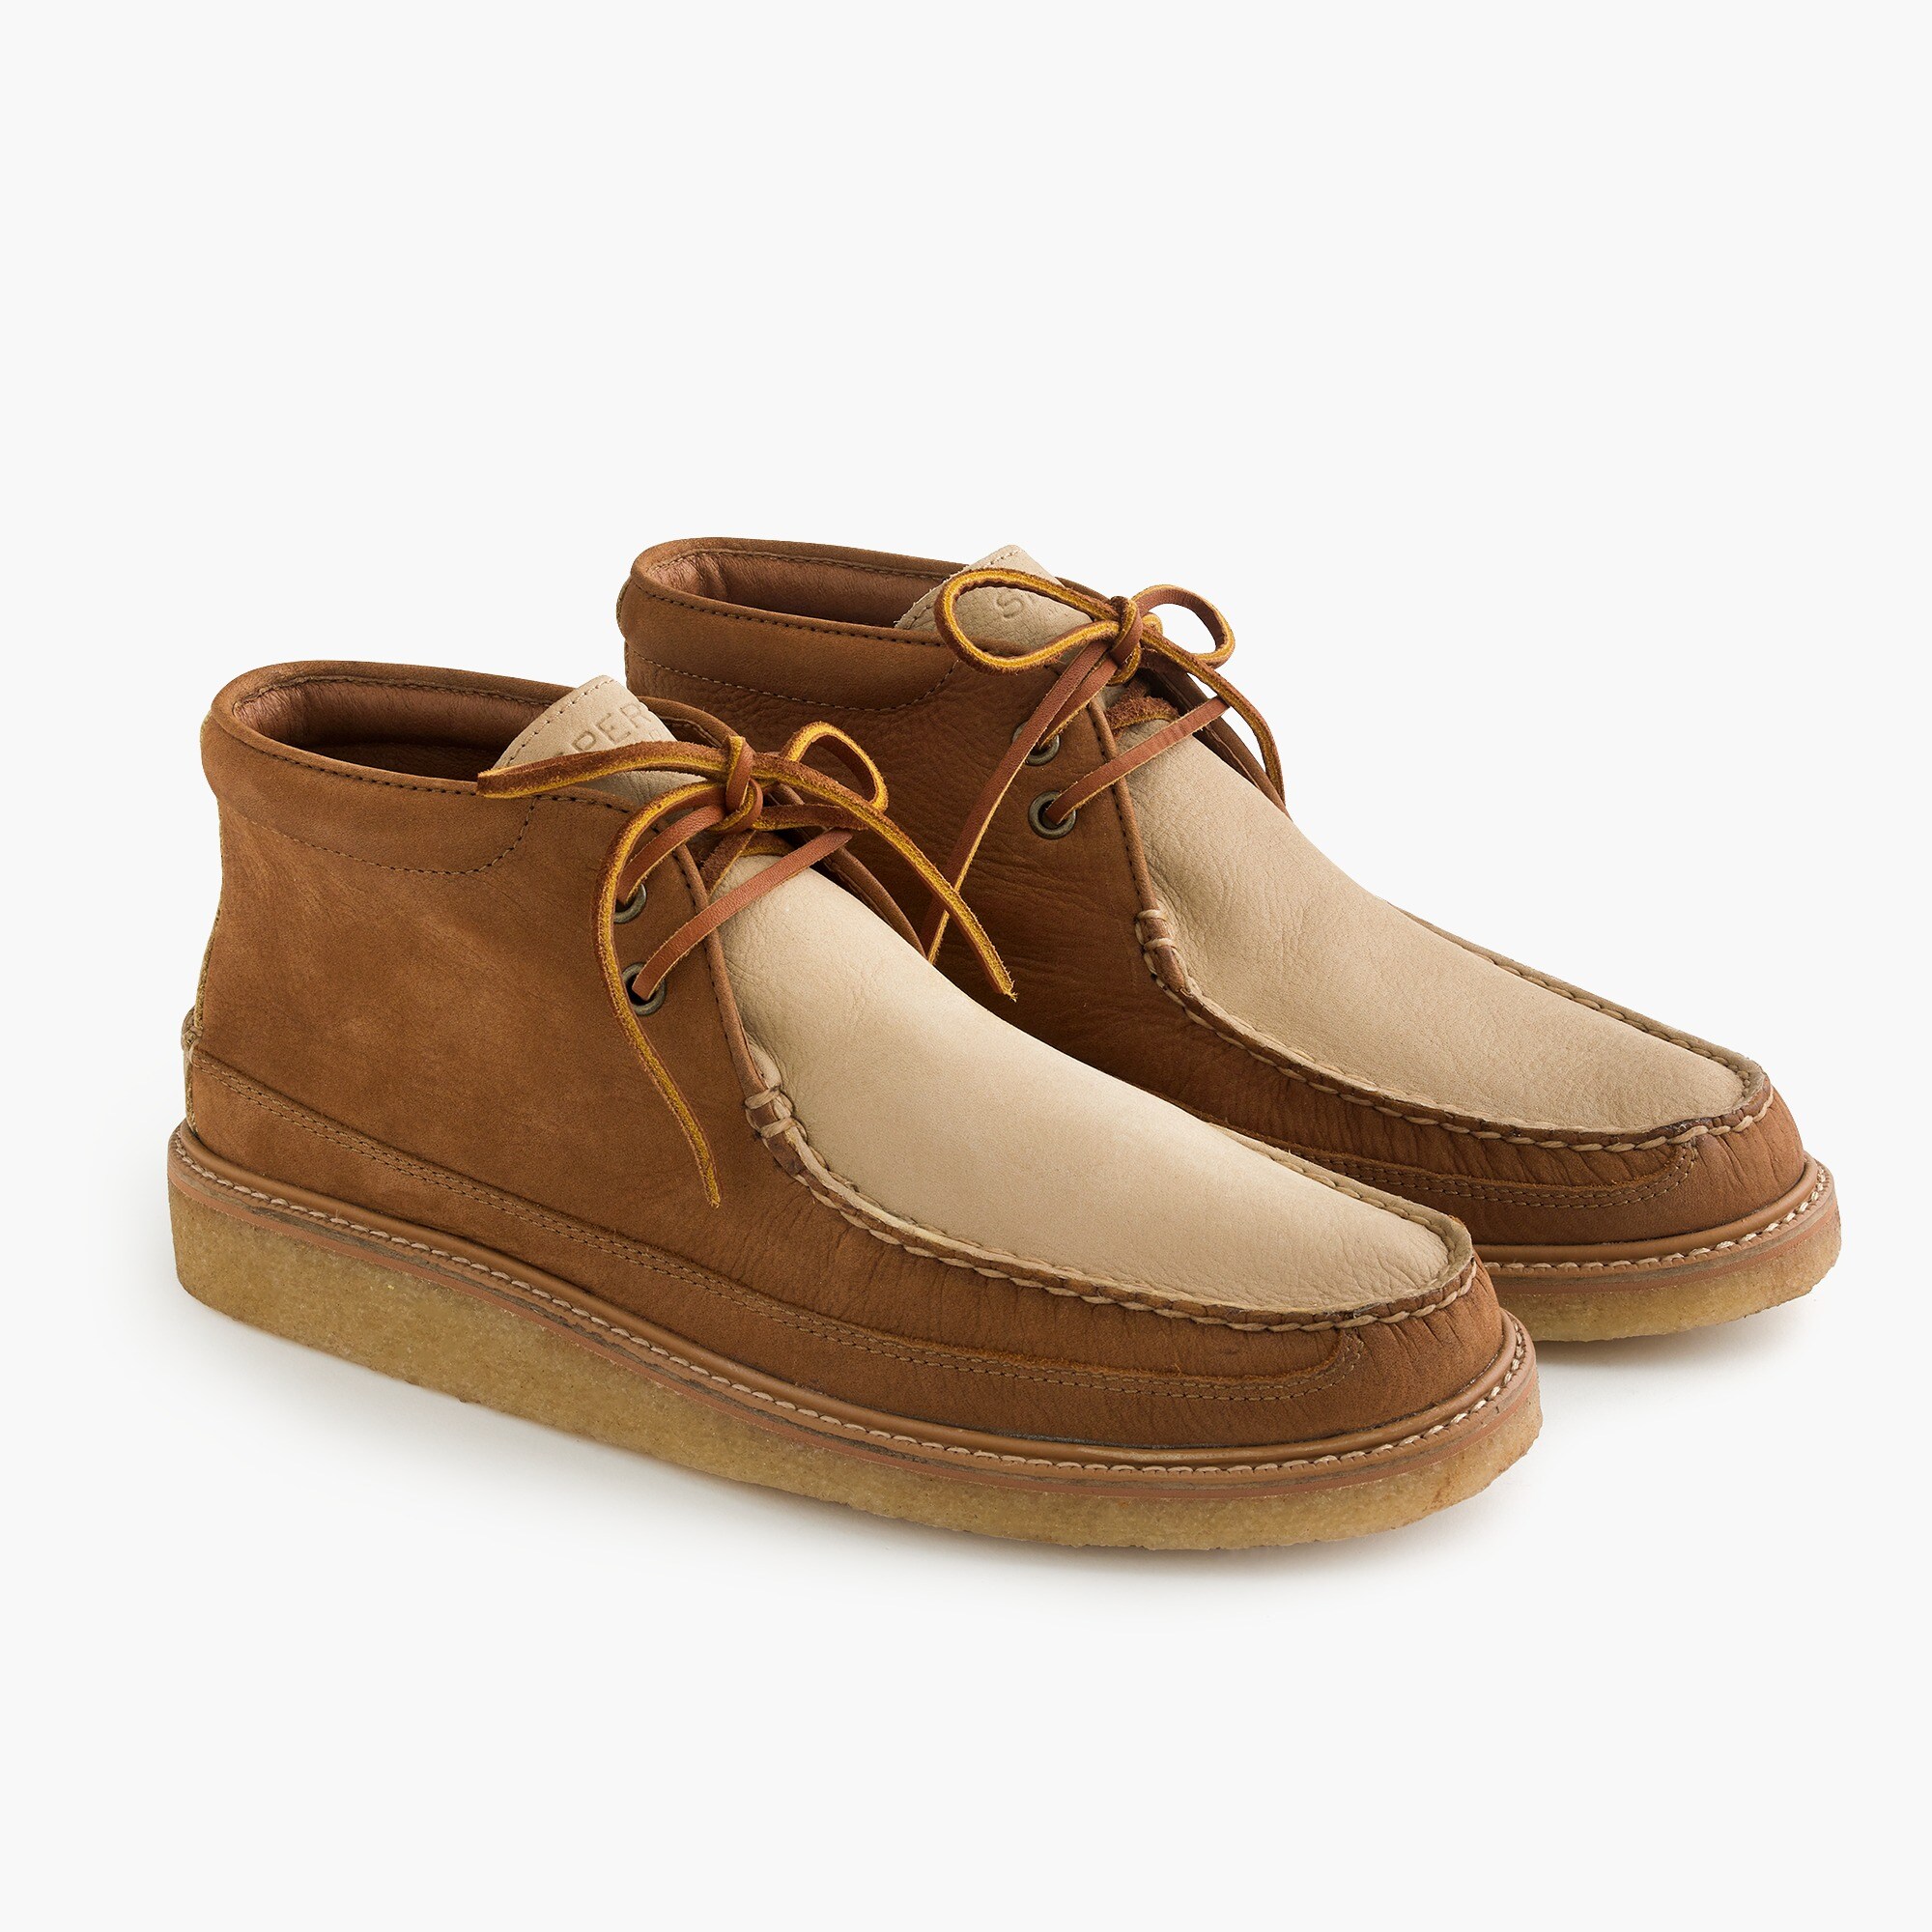 Men's Shoes: Boots, Sneakers, Slip-ons, Loafers | J.Crew